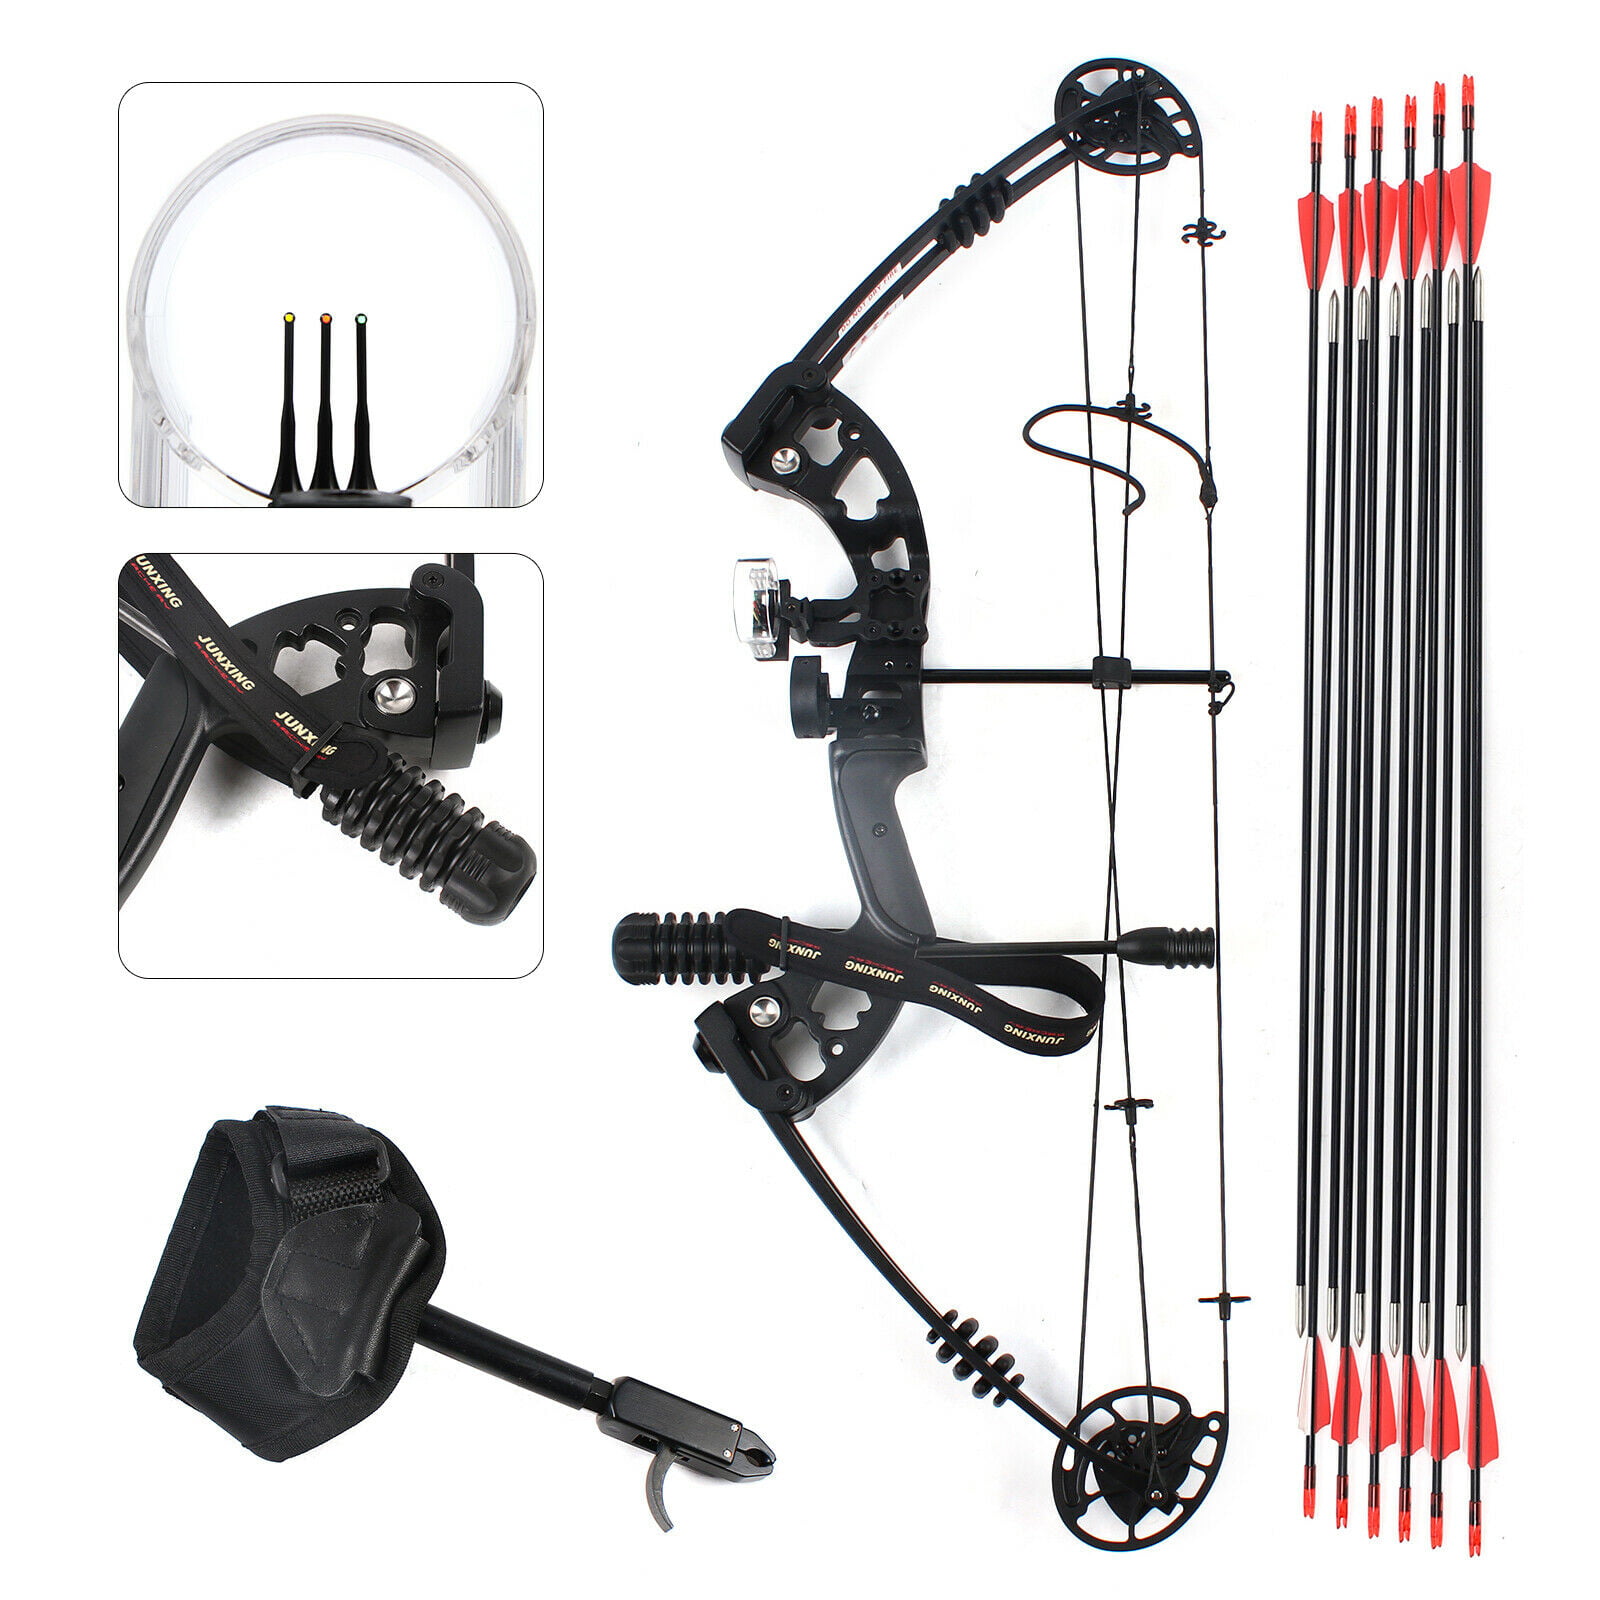 Youth Compound Bow with Accessories and Aluminium Arrows 